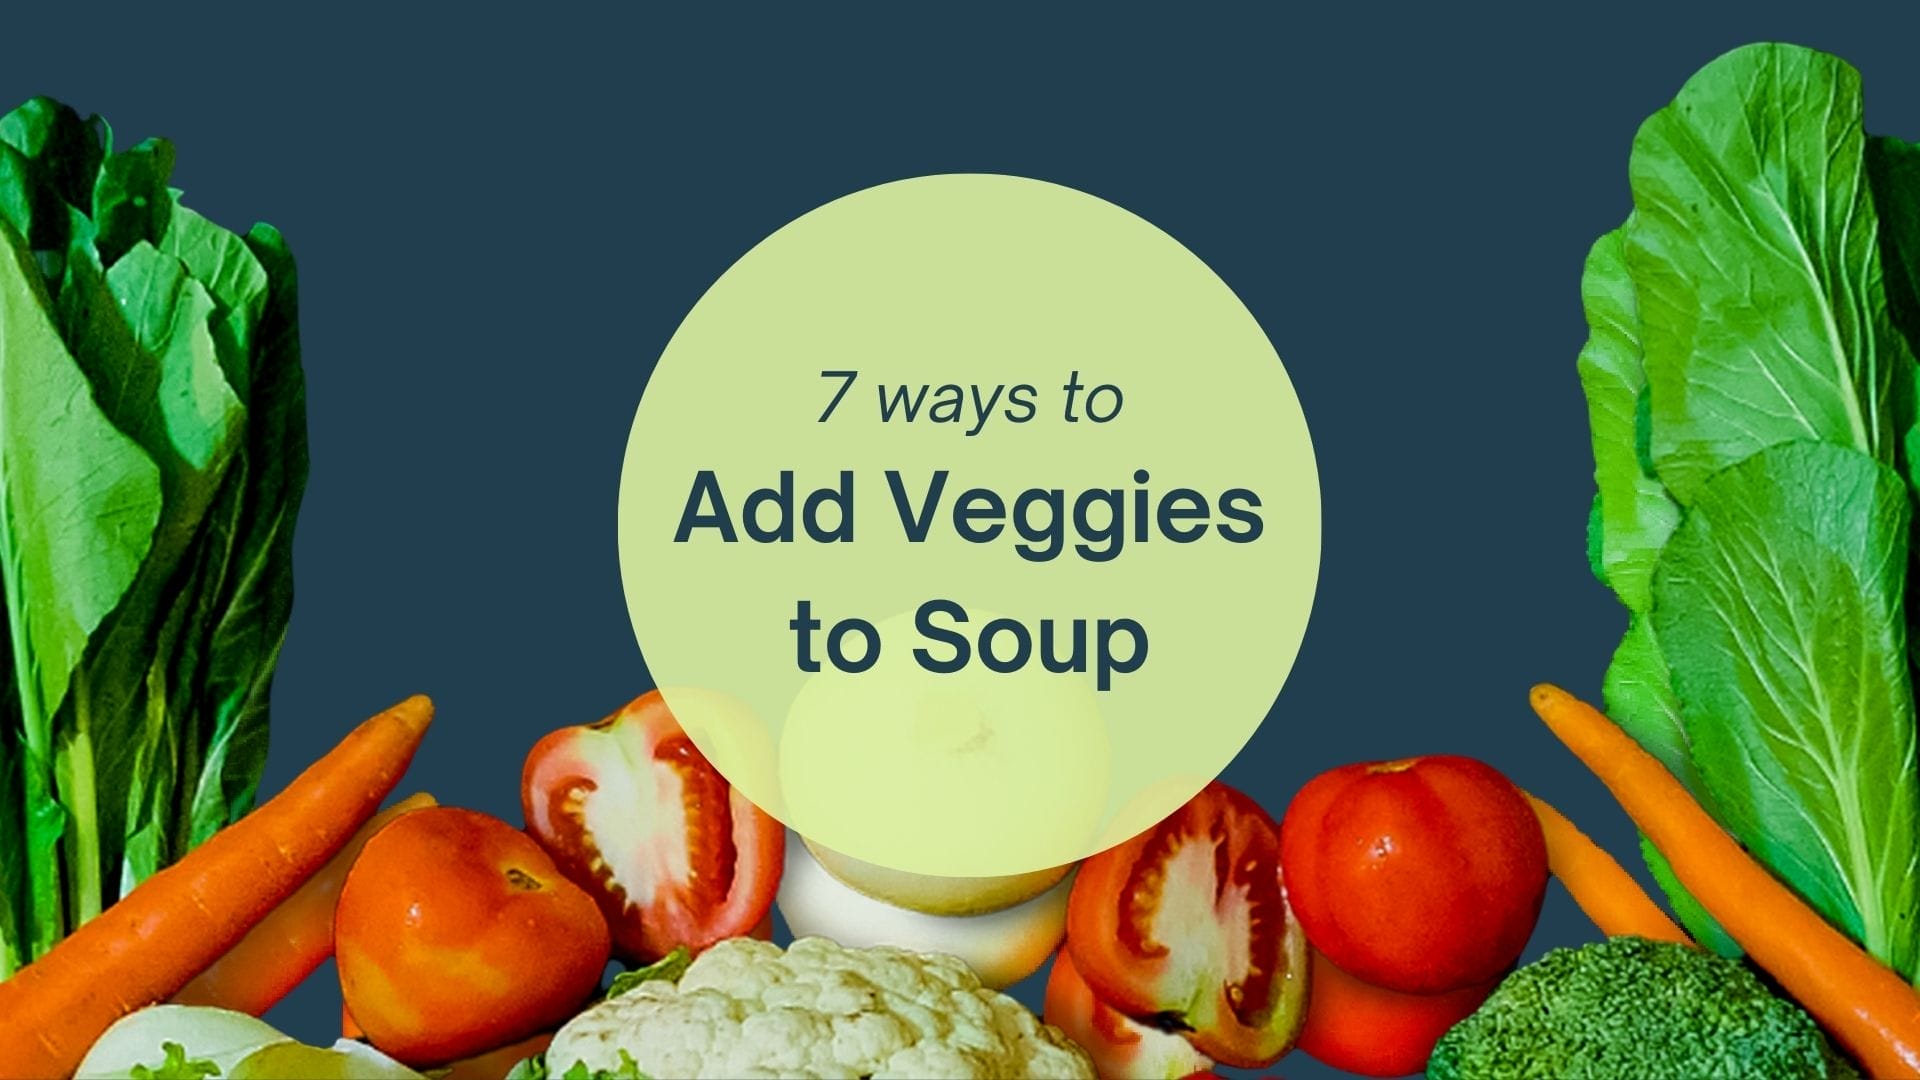 7 ways to add veg to soup banner image